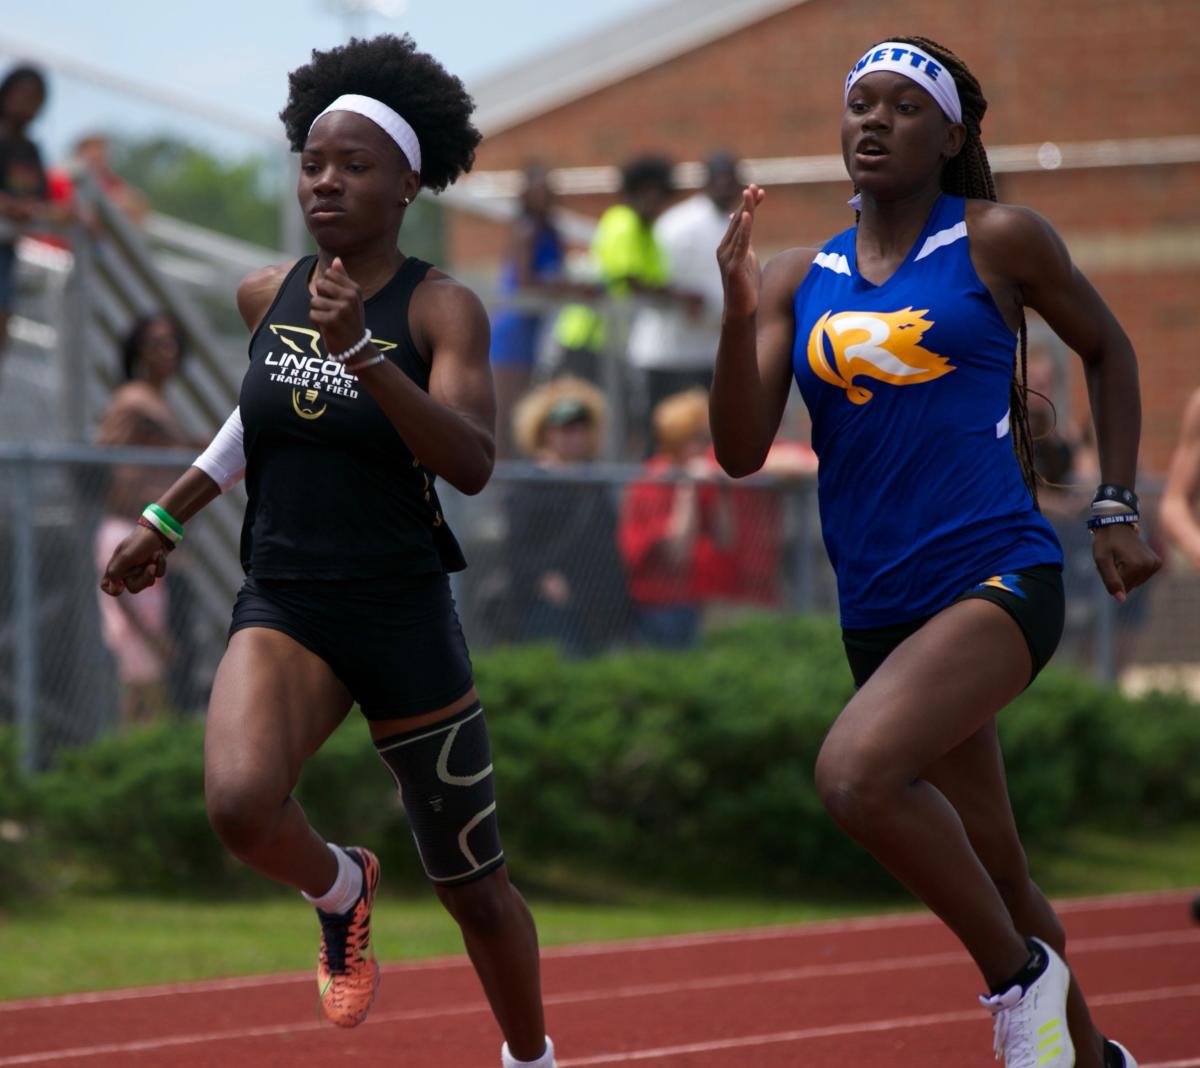 Here's who from the Big Bend to look out for at FHSAA track and field